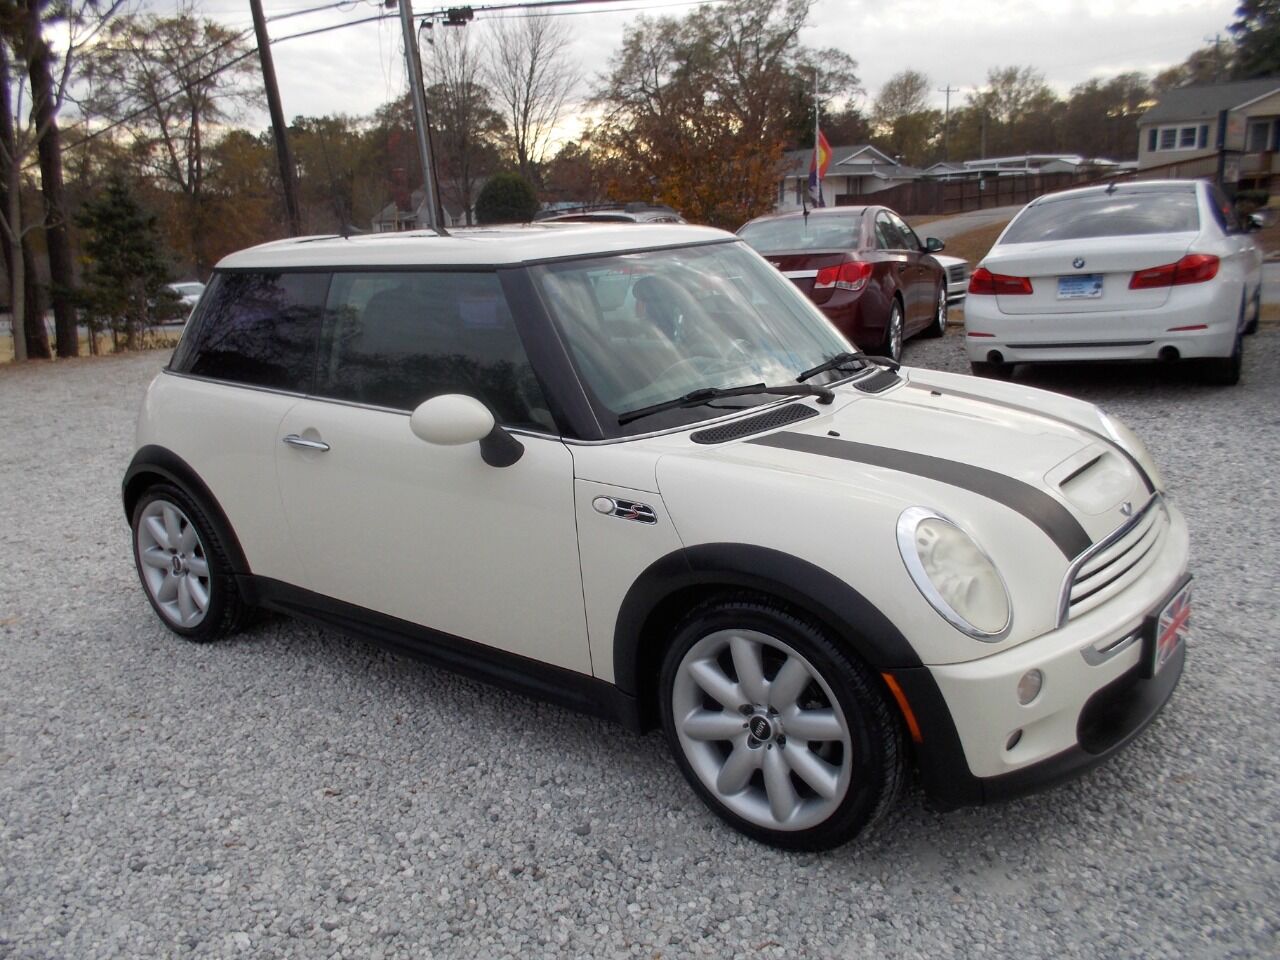 Preowned 2005 MINI Cooper S S 2dr Supercharged Hatchback for sale by Carolina Auto Connection in Spartanburg, SC